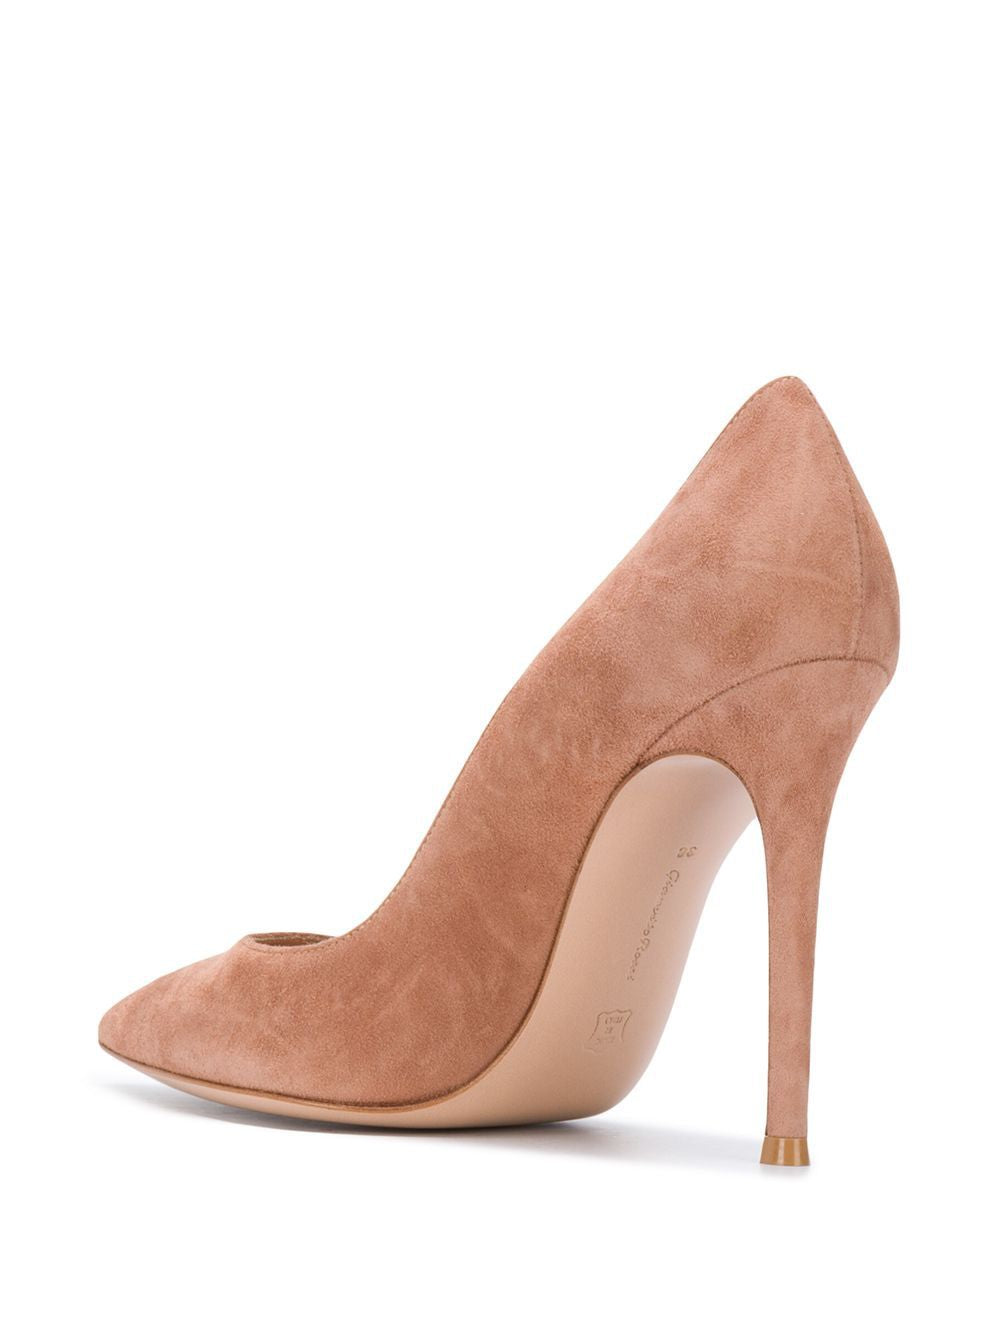 GIANVITO ROSSI Praline Suede Pumps for Women from FW22 Collection